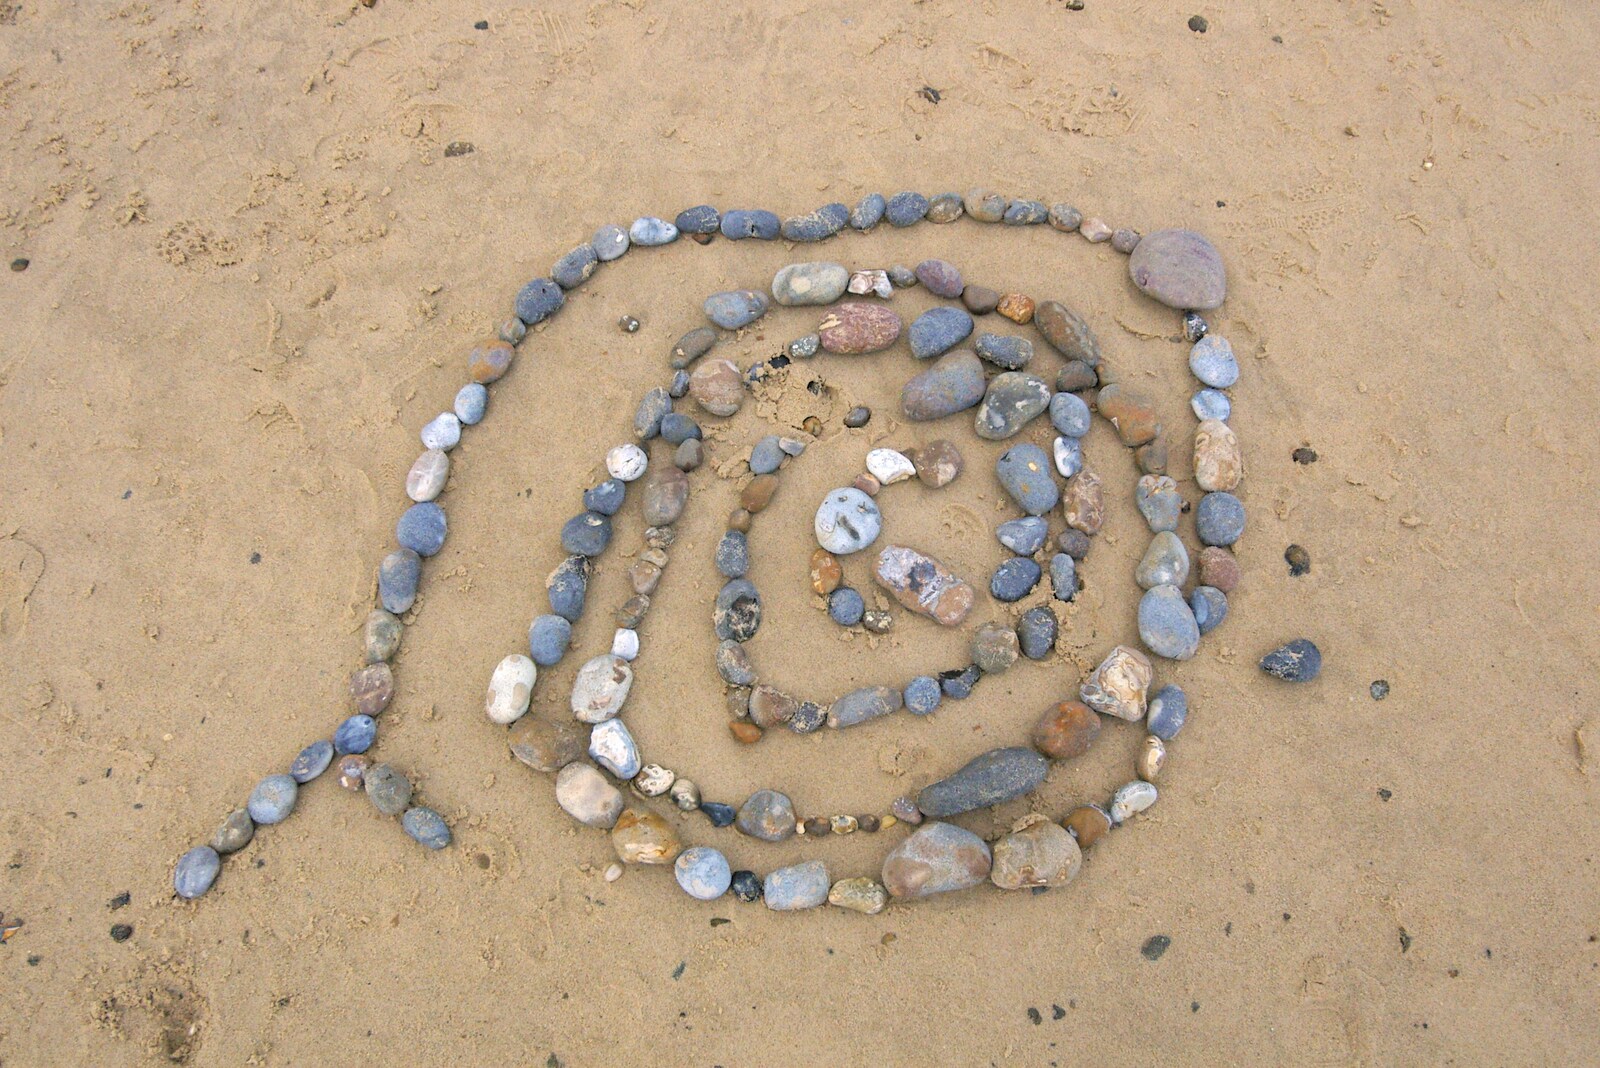 A cool swirly fish-shape made of pebbles from The Regatta Restaurant with Mother and Mike, Aldeburgh, Suffolk - 10th August 2006